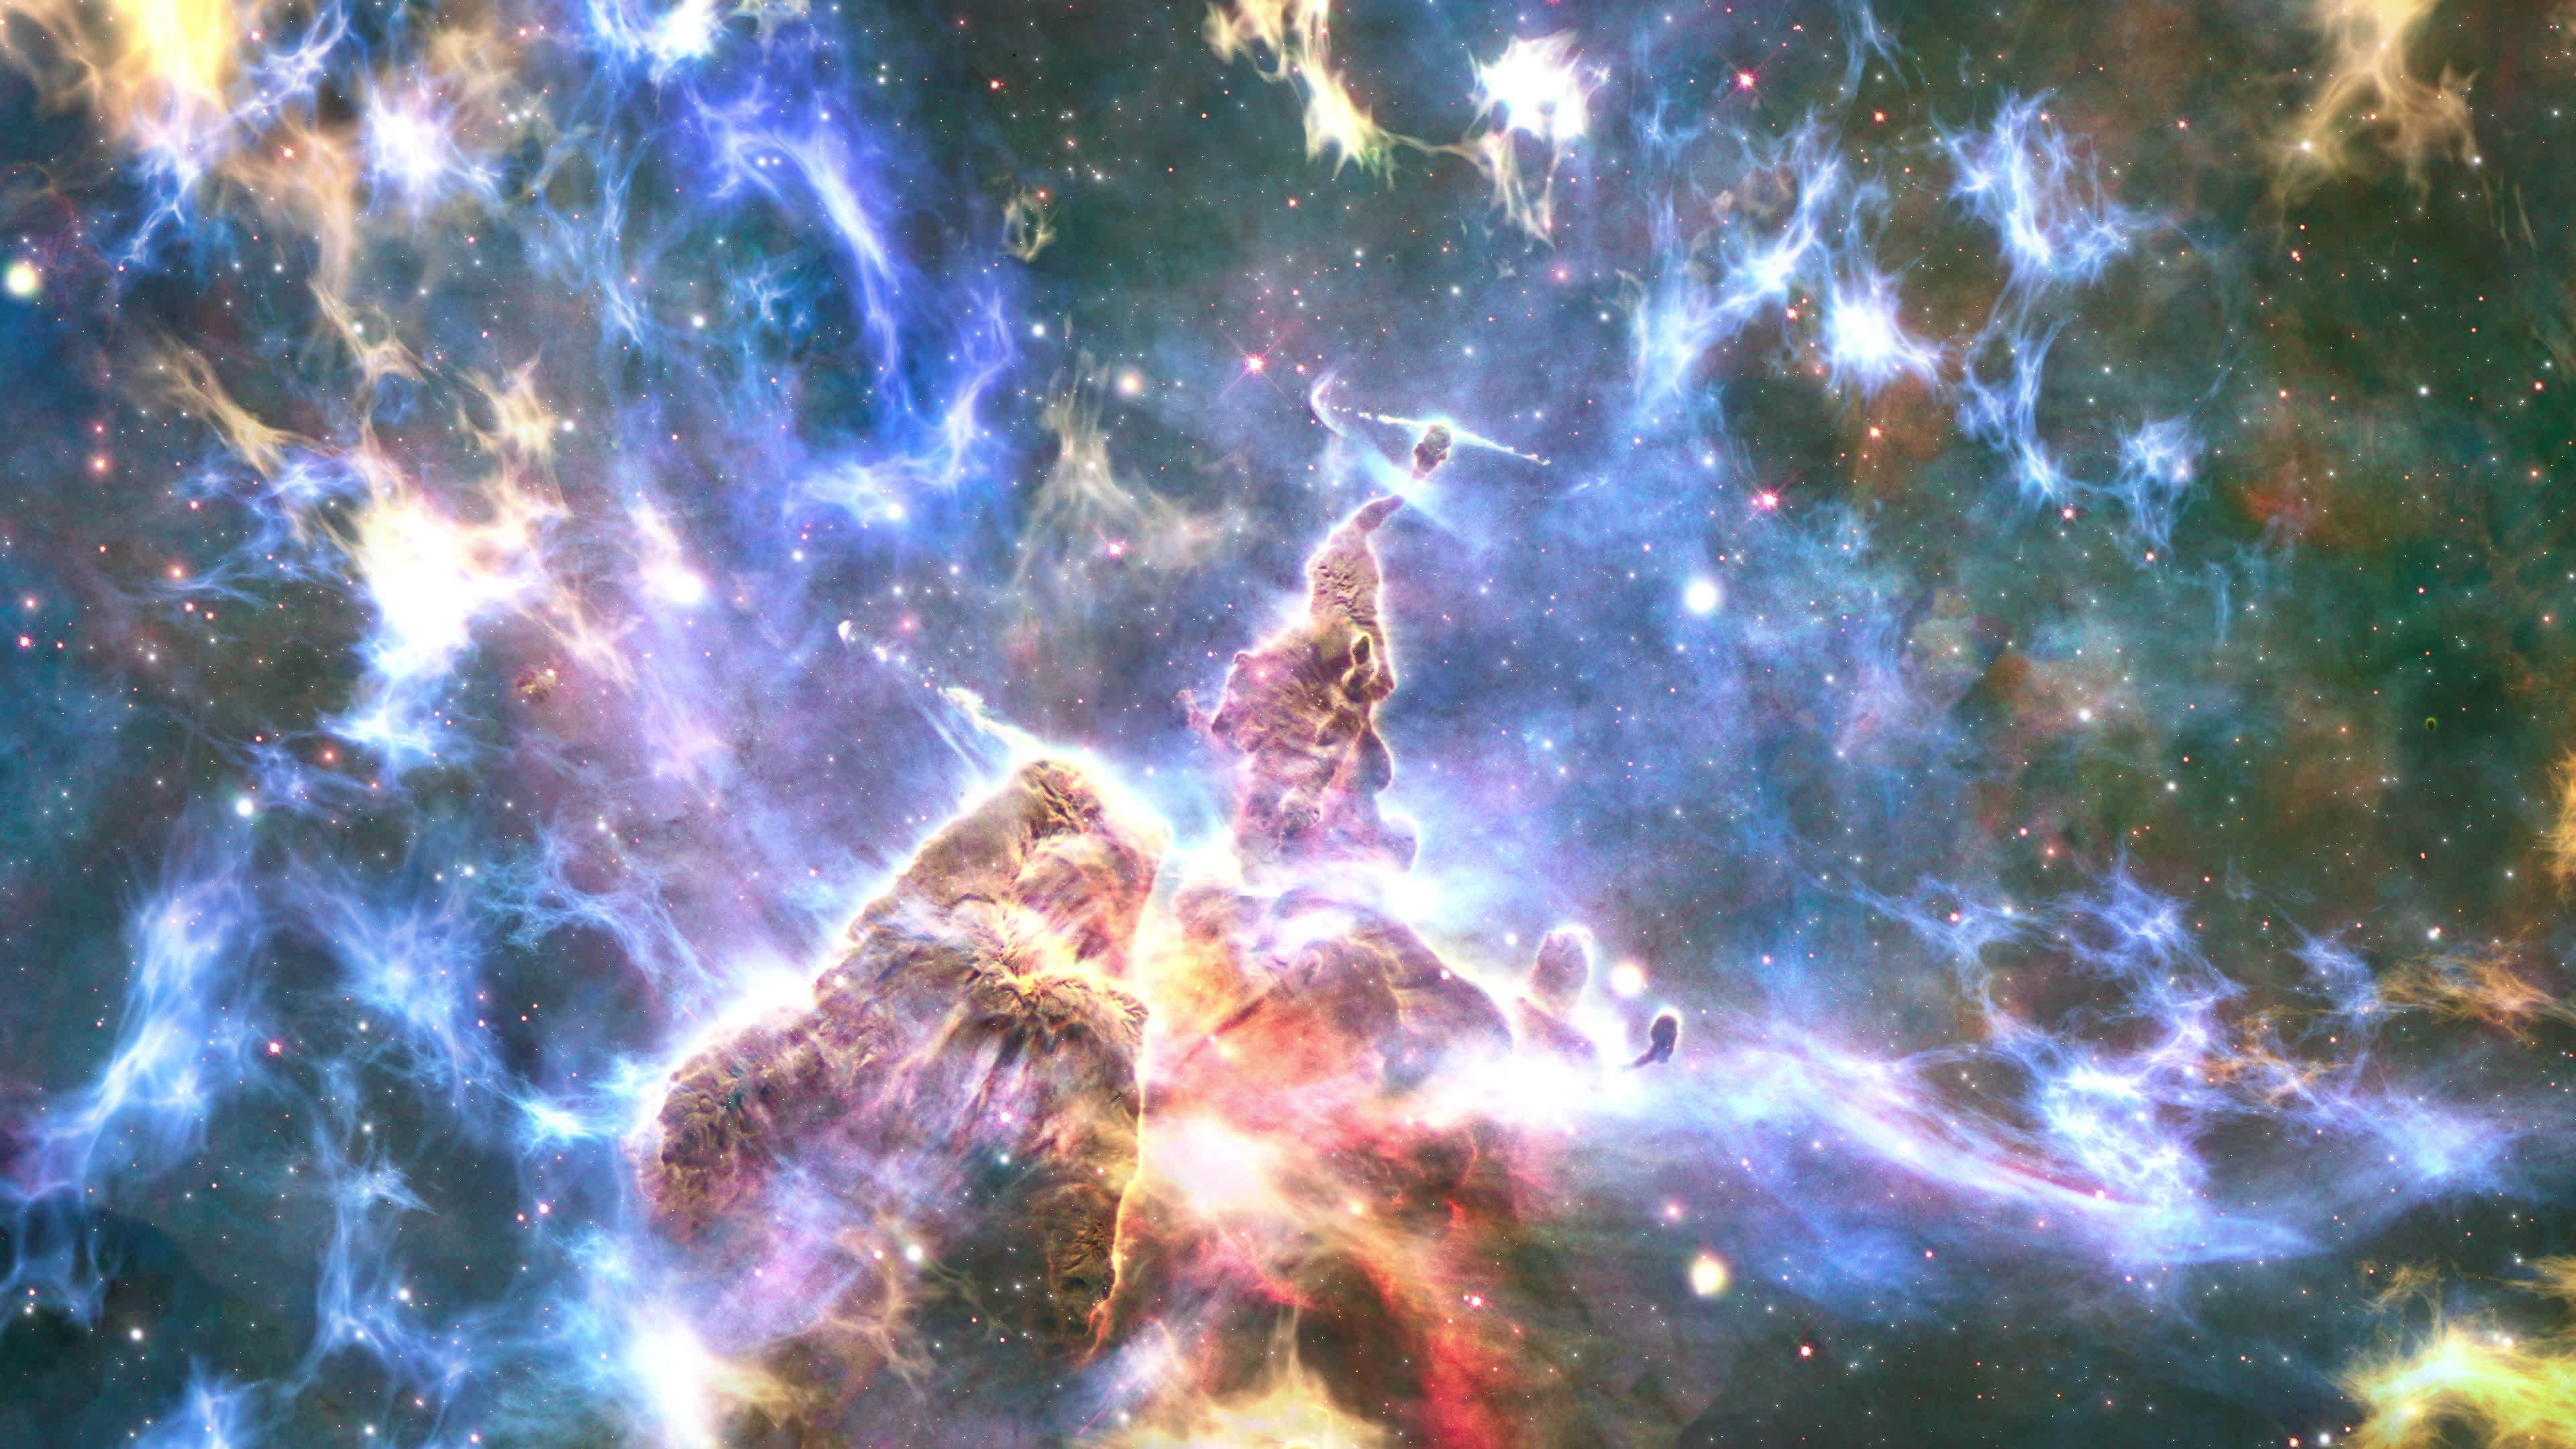 The Carina Nebula from the Ground Photograph by Eric Glaser - Pixels